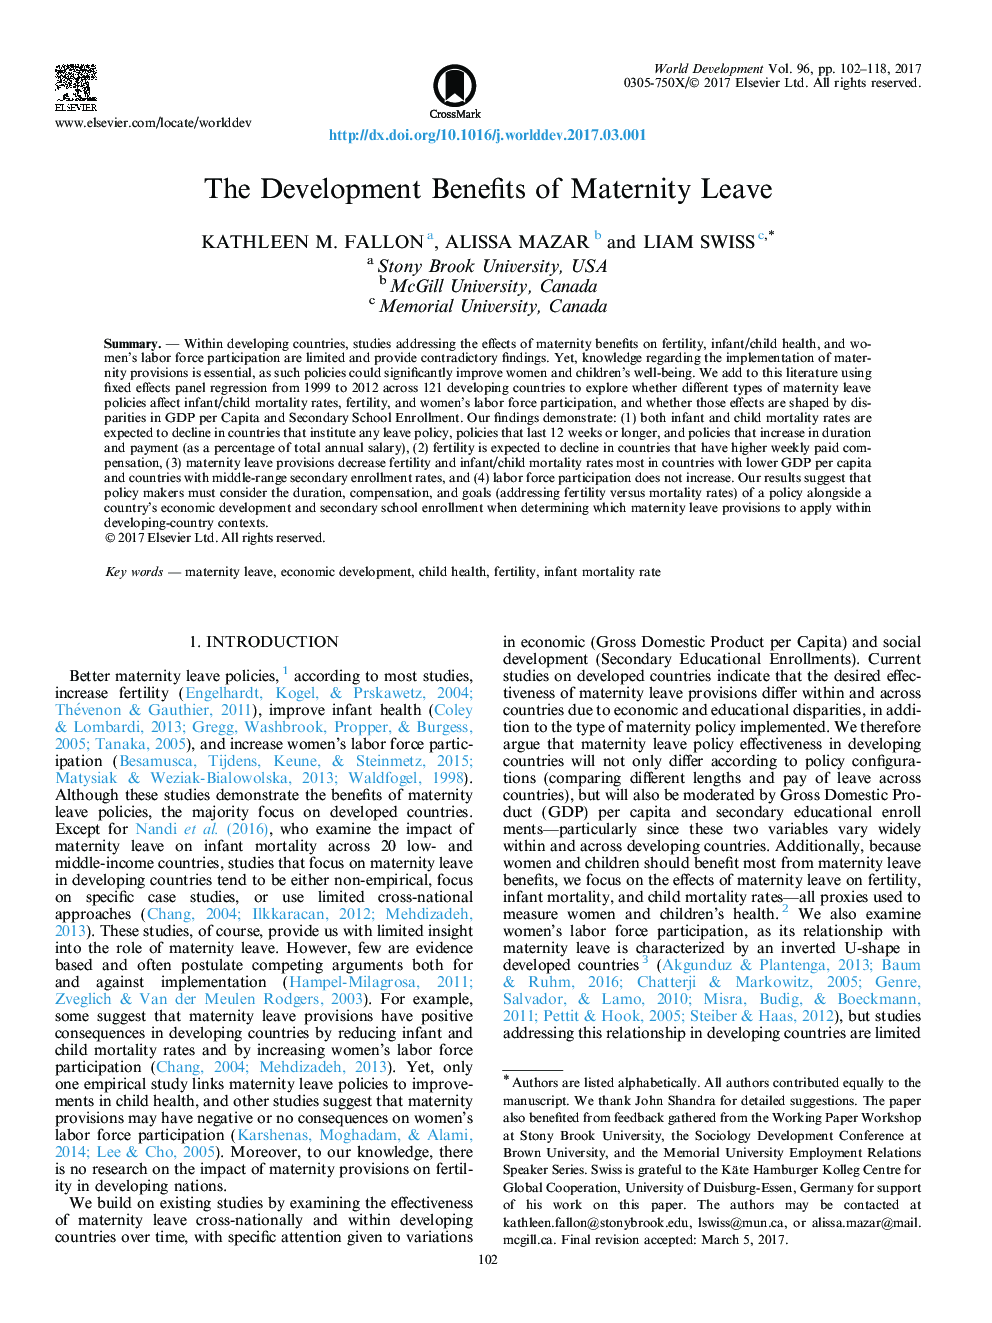 The Development Benefits of Maternity Leave